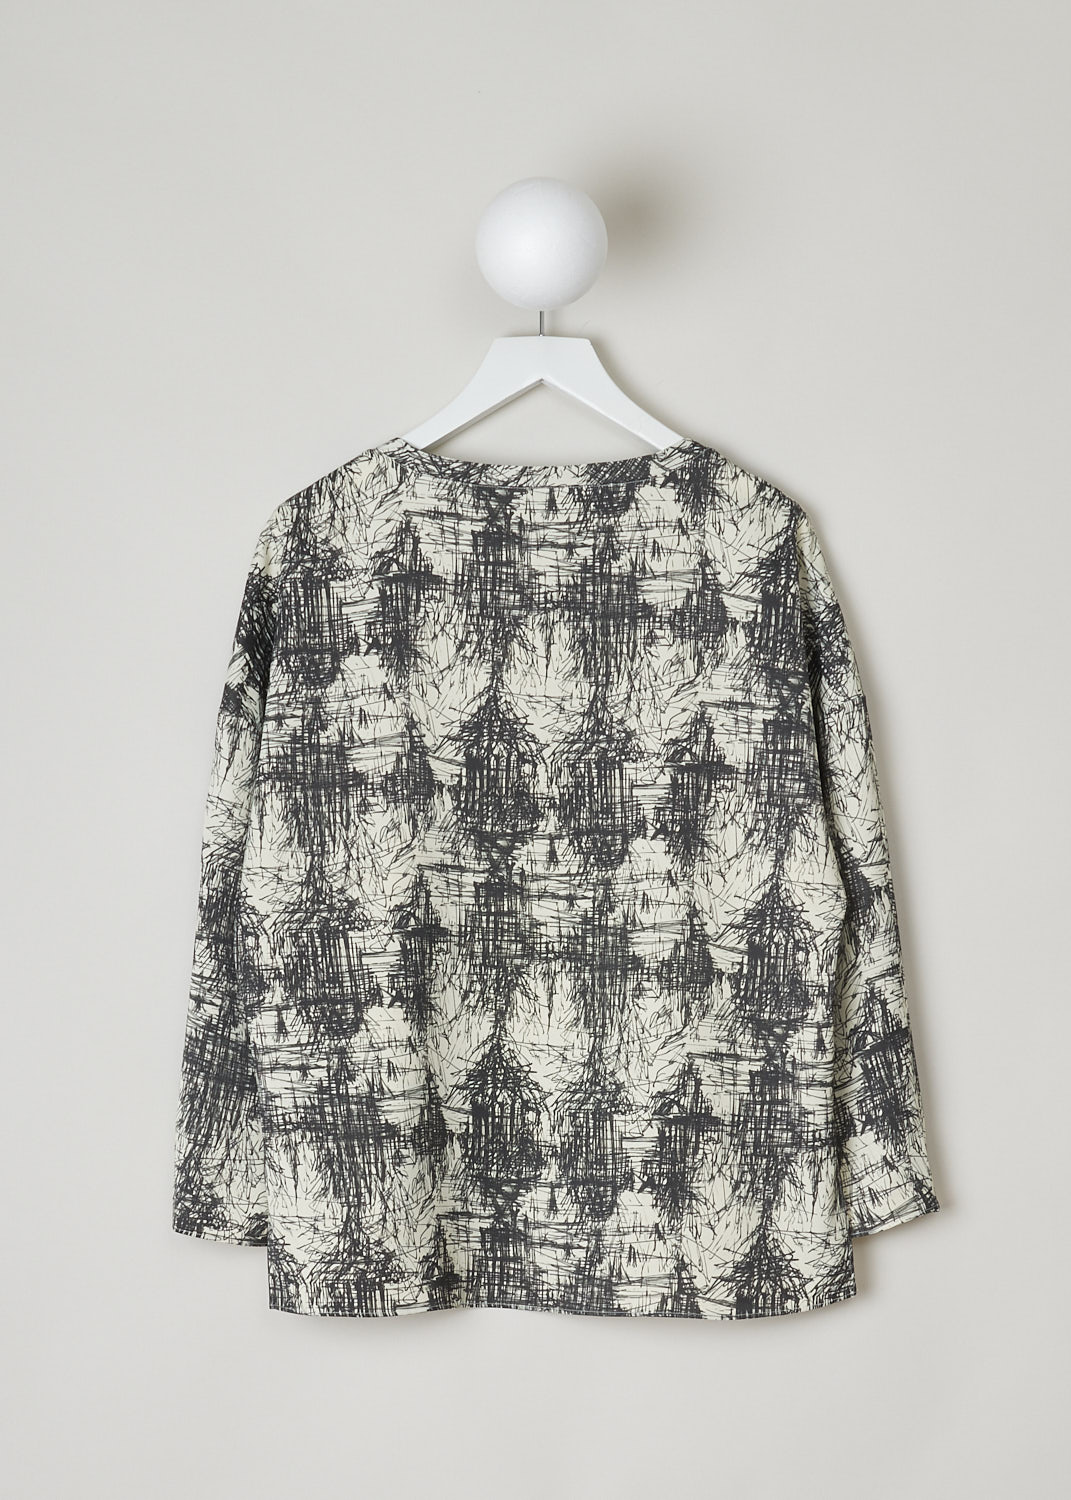 ASPESI, LONG SLEEVE SCRIBBLE PRINT TOP, 5619_V128_60042, Print, Black, White, Back, This top has an off-white base with a black scribble print allover. The top features a round neckline and long sleeves with small slits. In the front, the top has a rounded hemline with side slits. In the back, the hemline is straight. This model has an asymmetric finish, meaning the back is longer than the front.
